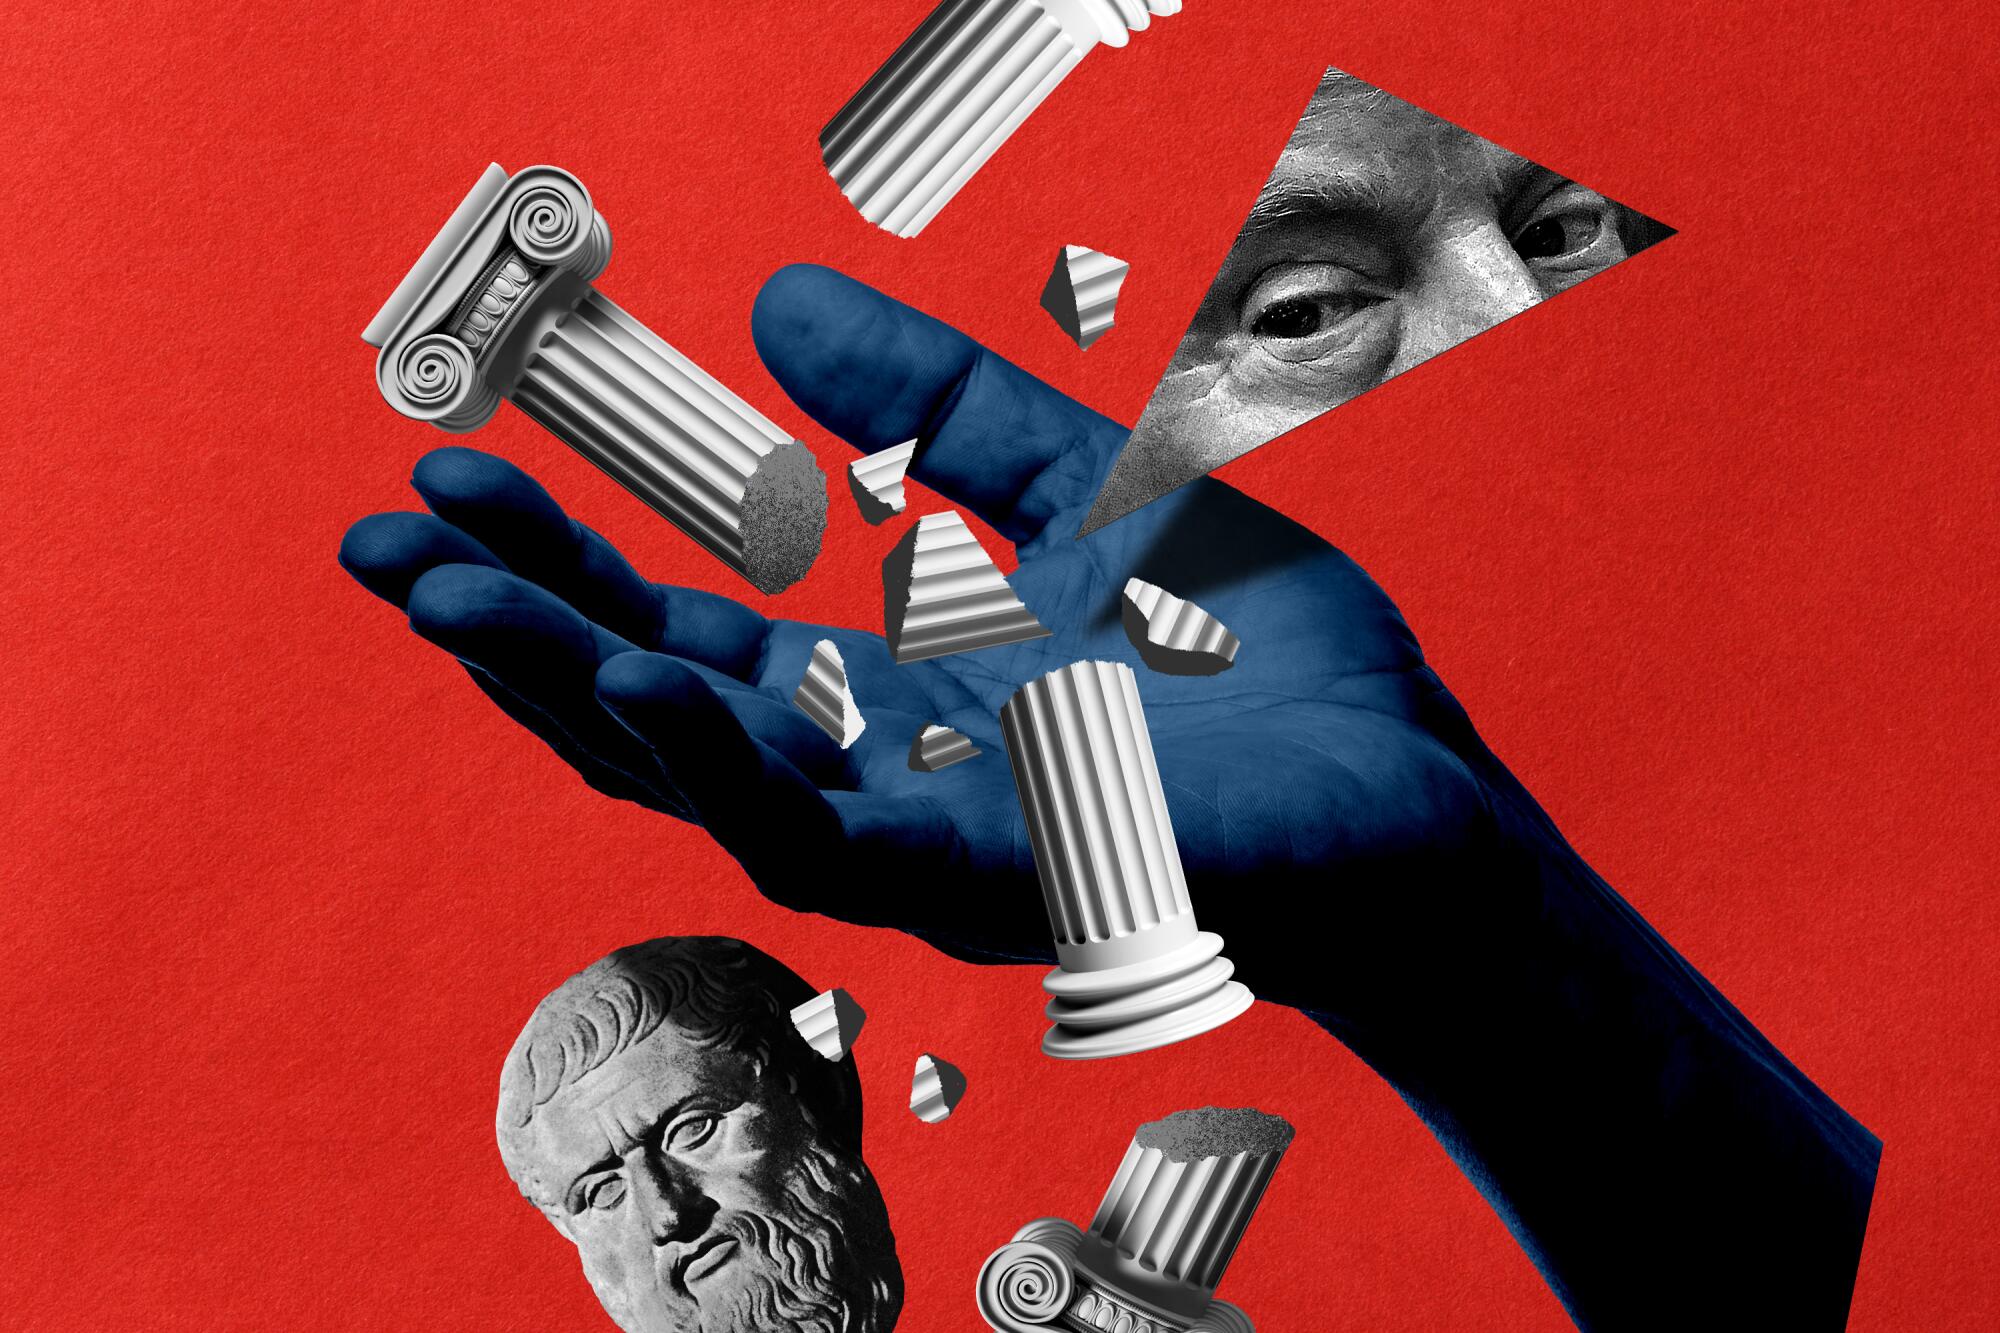 Illustration of a hand with broken Greek columns, bust of Plato, and Donald Trump's eyes